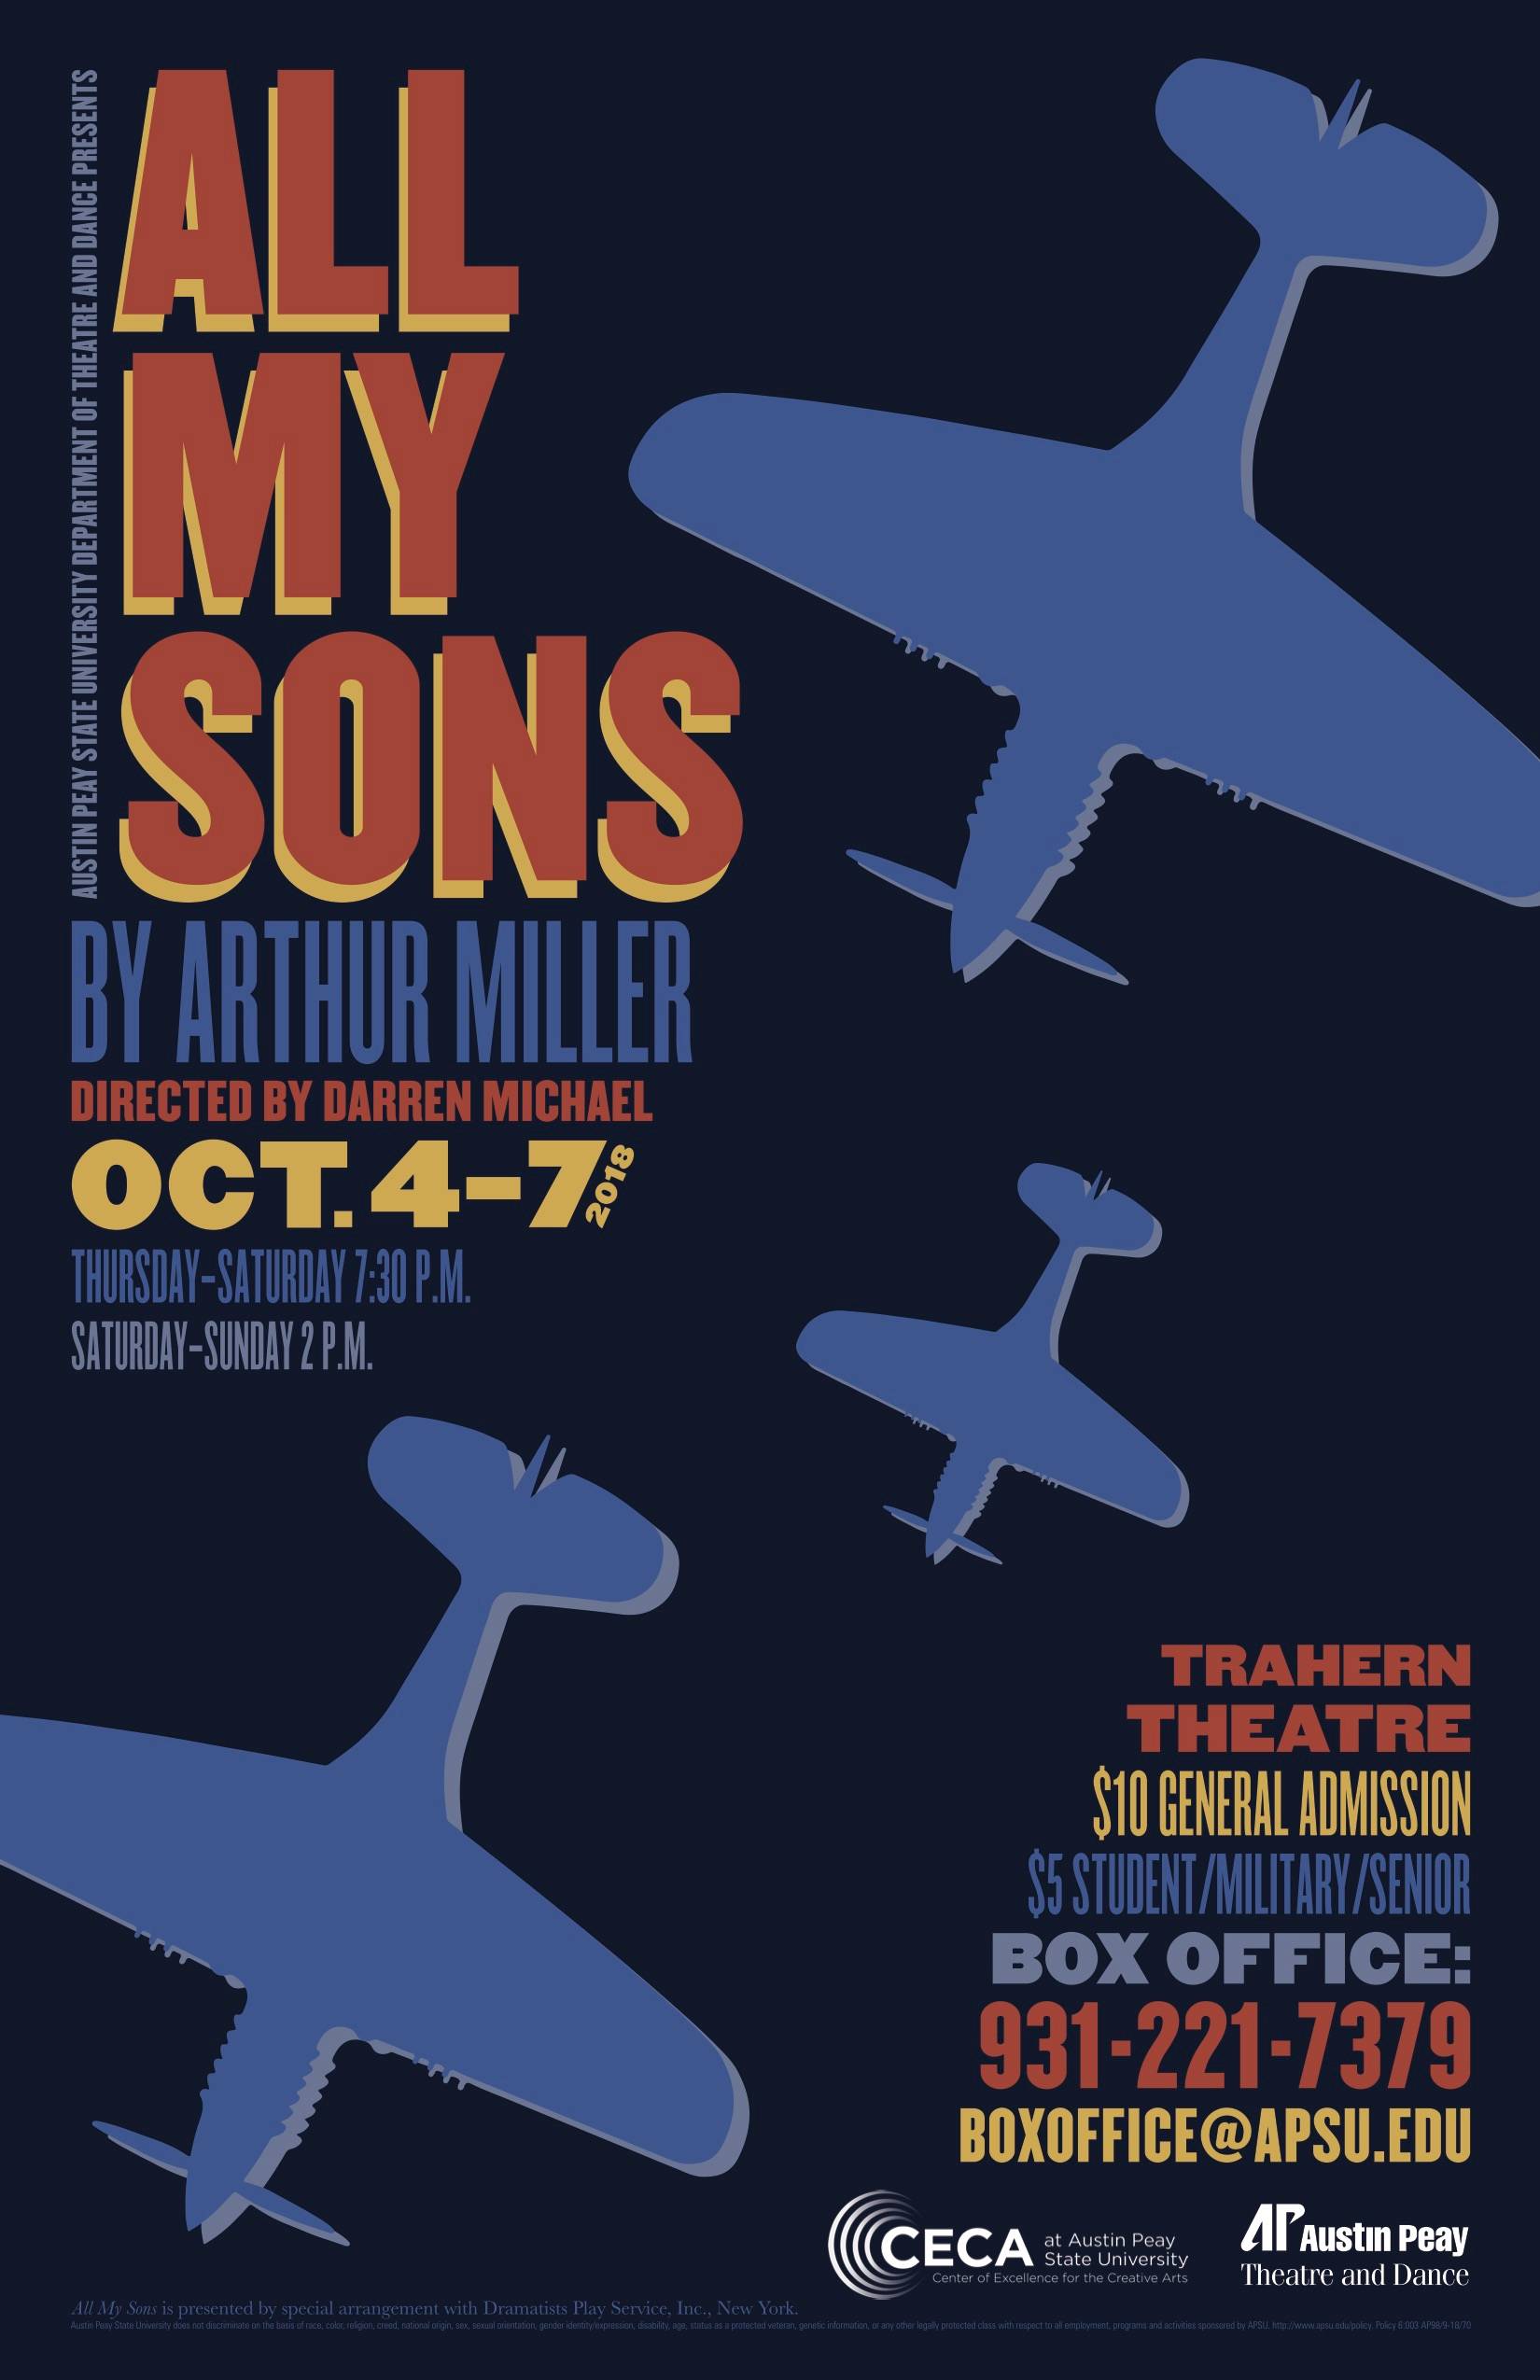 On Thursday, Oct. 4, the APSU Department of Theatre and Dance will open its 2018-19 season with “All My Sons” by Arthur Miller. The production will run through Sunday, Oct. 7.